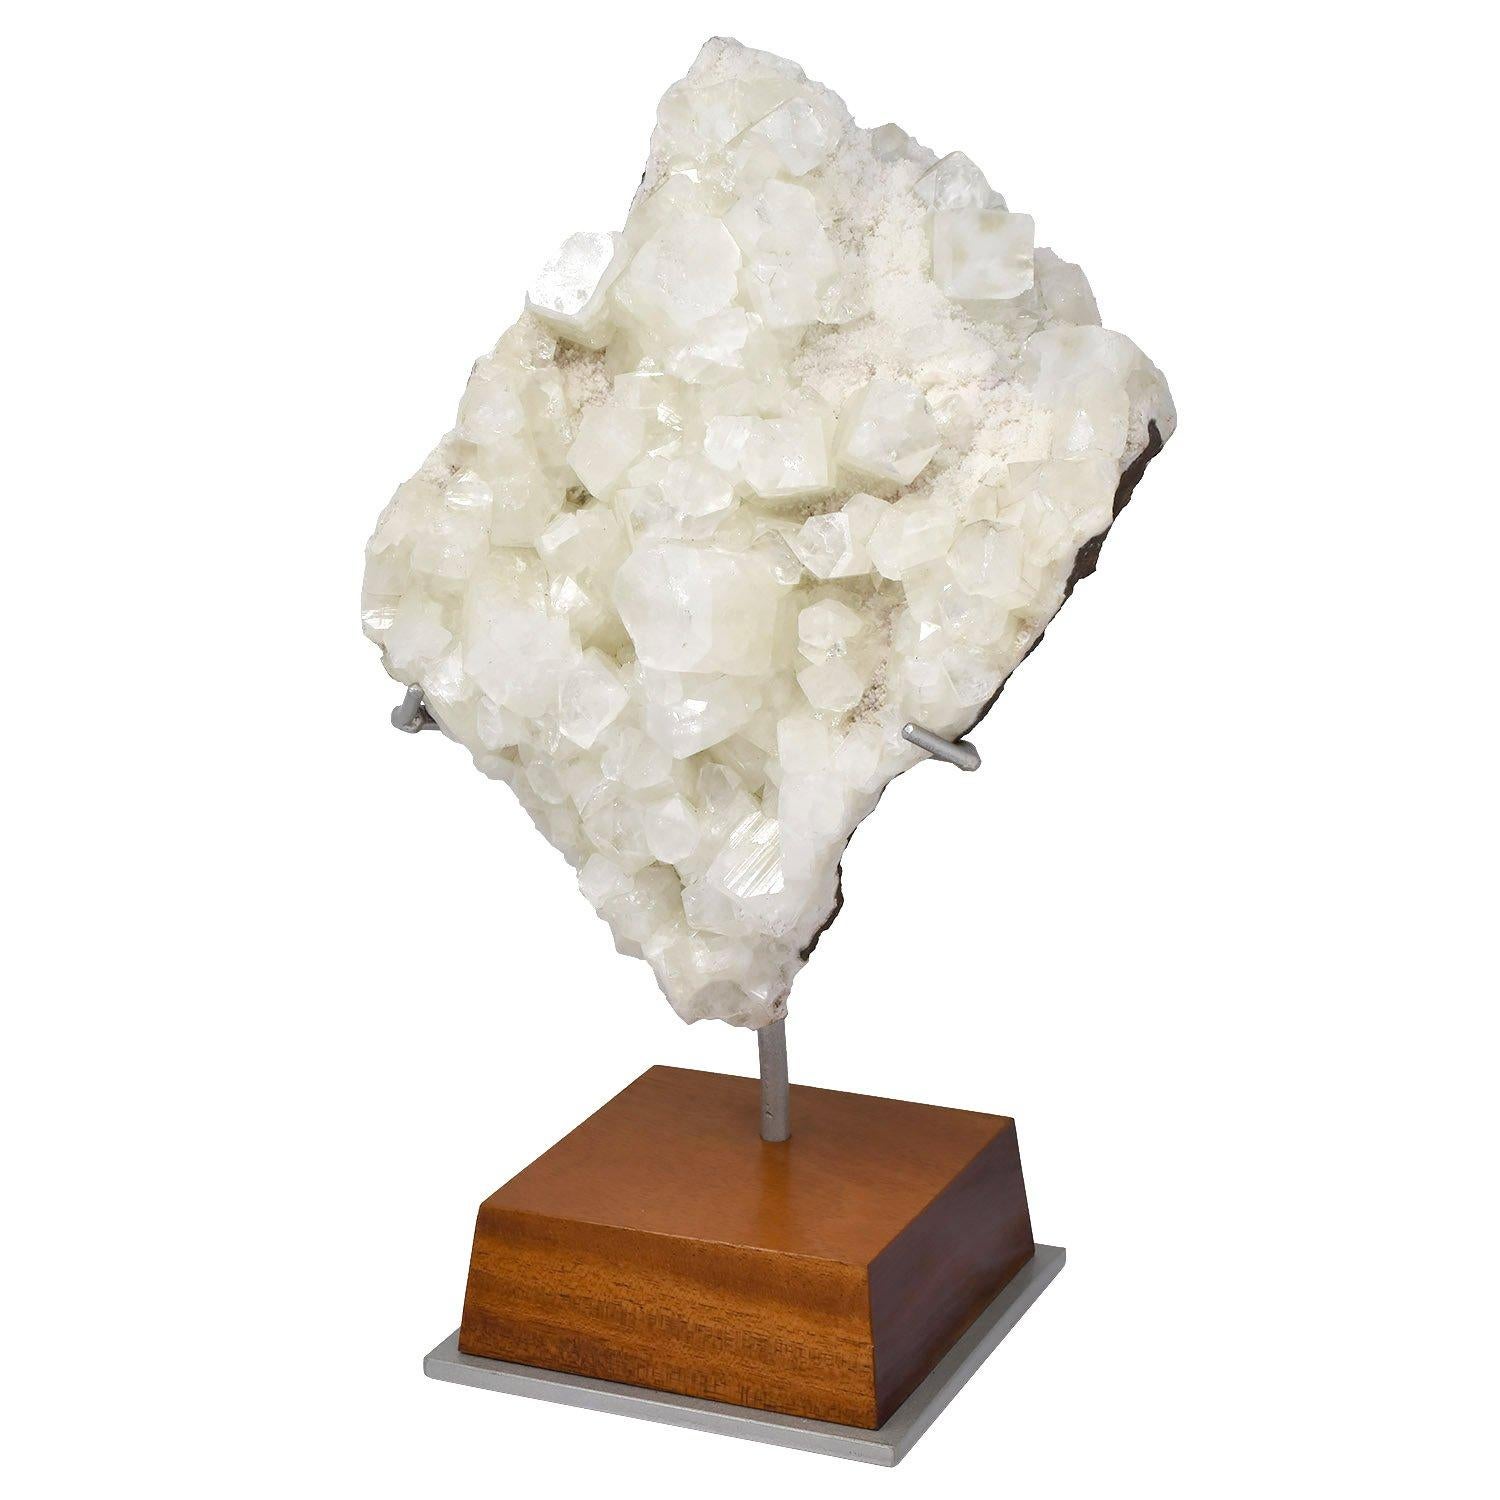 Naturally formed mineral, clear apophyllite sculpture

India

Measures: 11 x 8 x 4 in. / 28 x 20 x 10 cm

Height on custom display stand: 14 in. / 36 cm

Custom mounted on a nickel-painted steel and bevelled cherry wood base.

